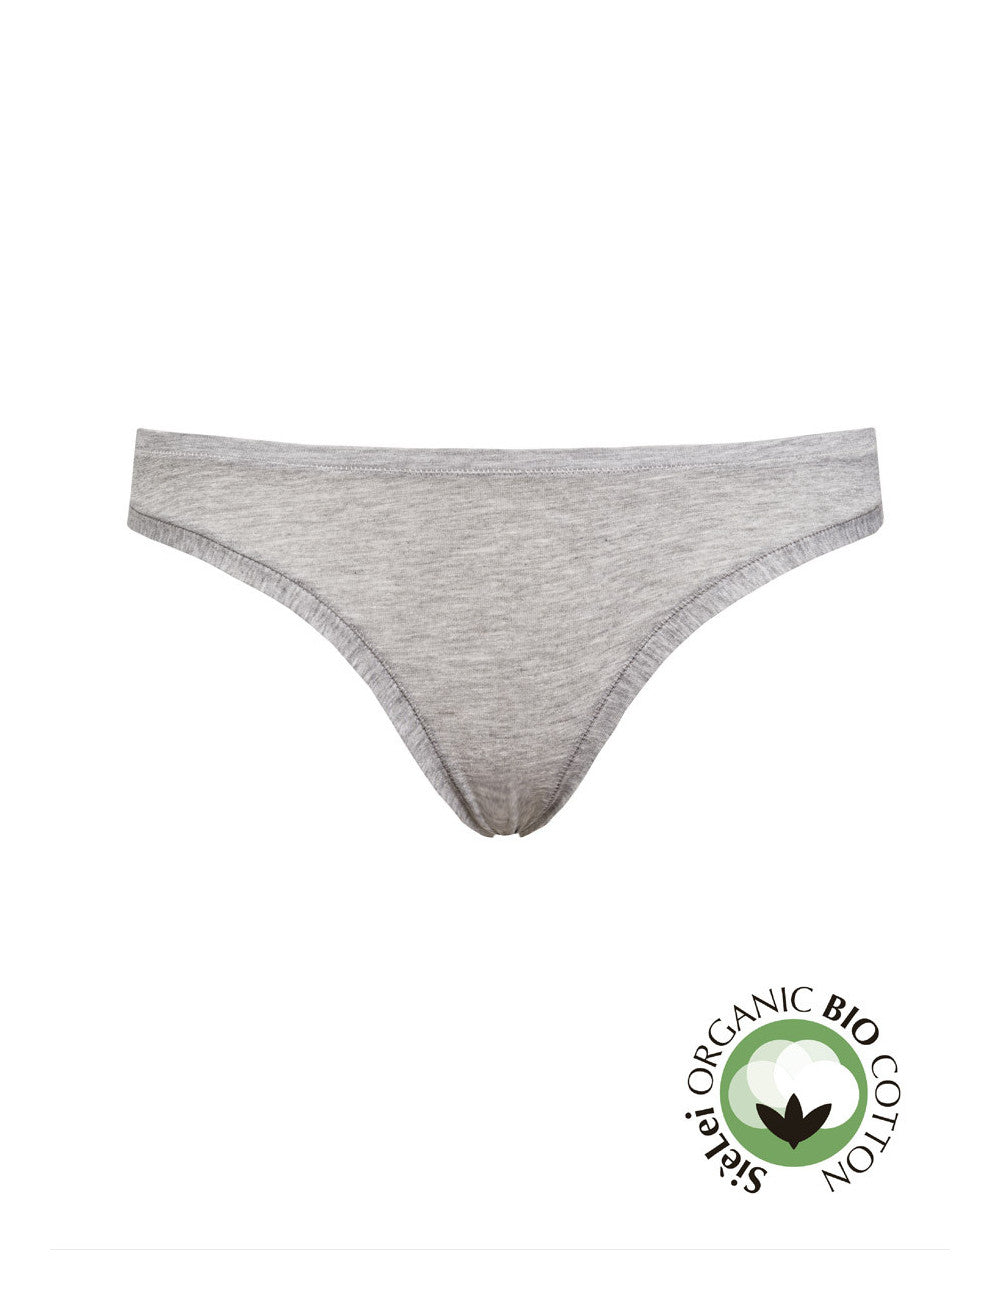 SIéLEI's Organic Cotton Brazilian Panties from Italy are crafted with hand-picked organic cotton to create a thin, soft, stretchy fabric. 